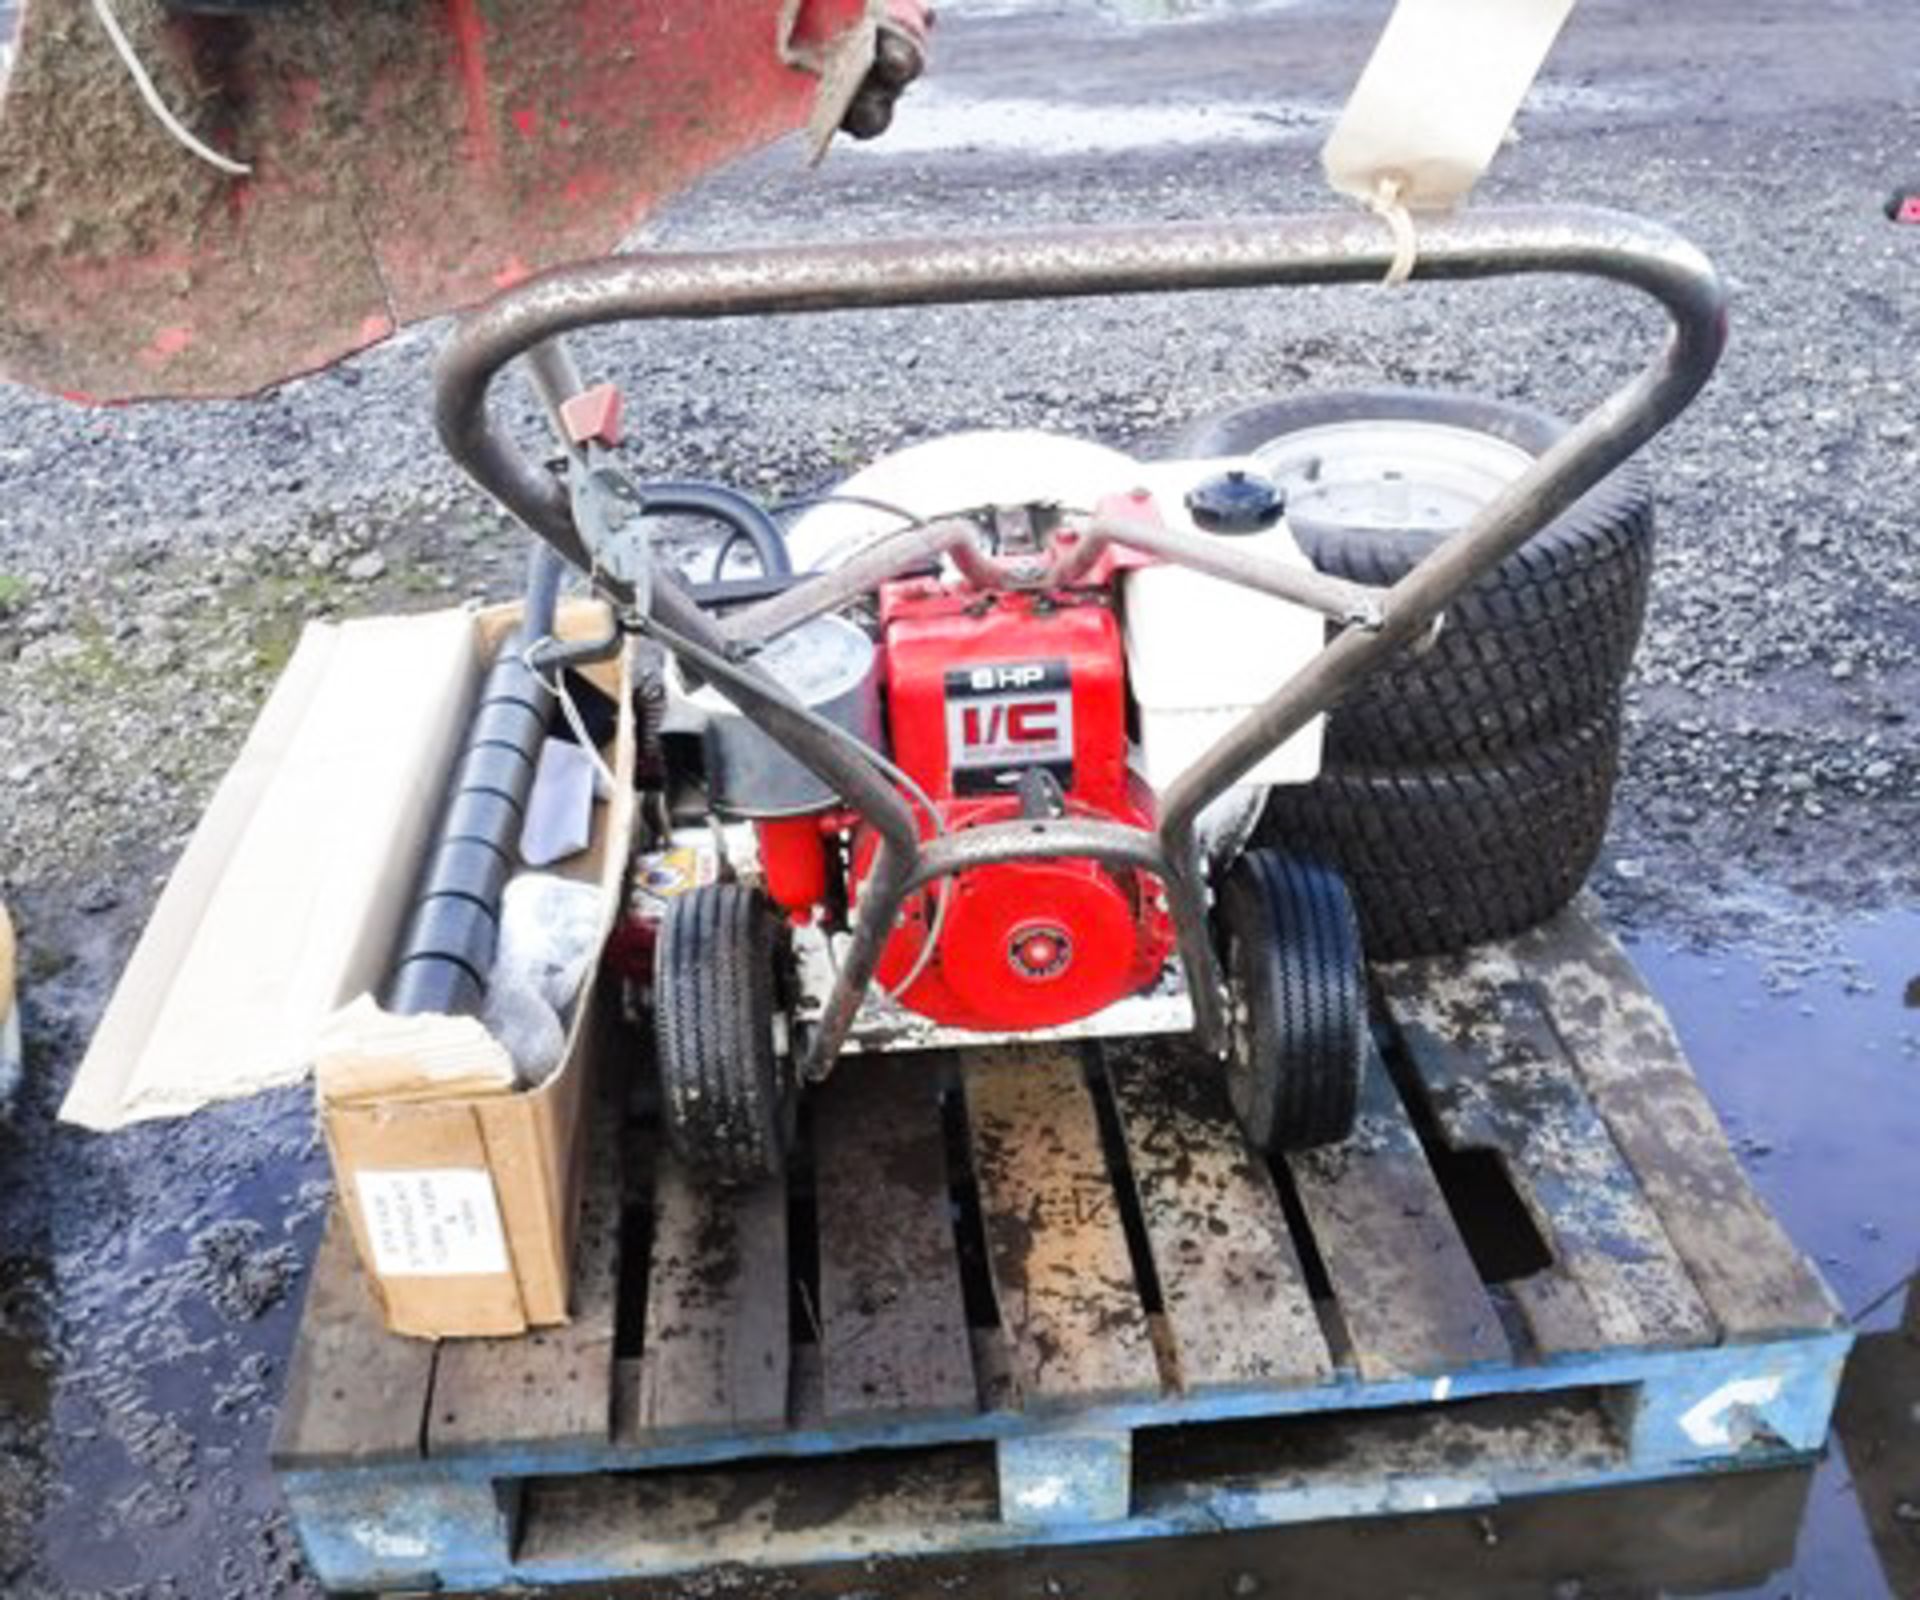 SMALL WONDER WHEELED BLOWER, LAWNFLITE STRIMMER FOR SPARES OR REPAIR, 1 X ROLLER KIT FOR RIDE ON MOW - Image 4 of 4